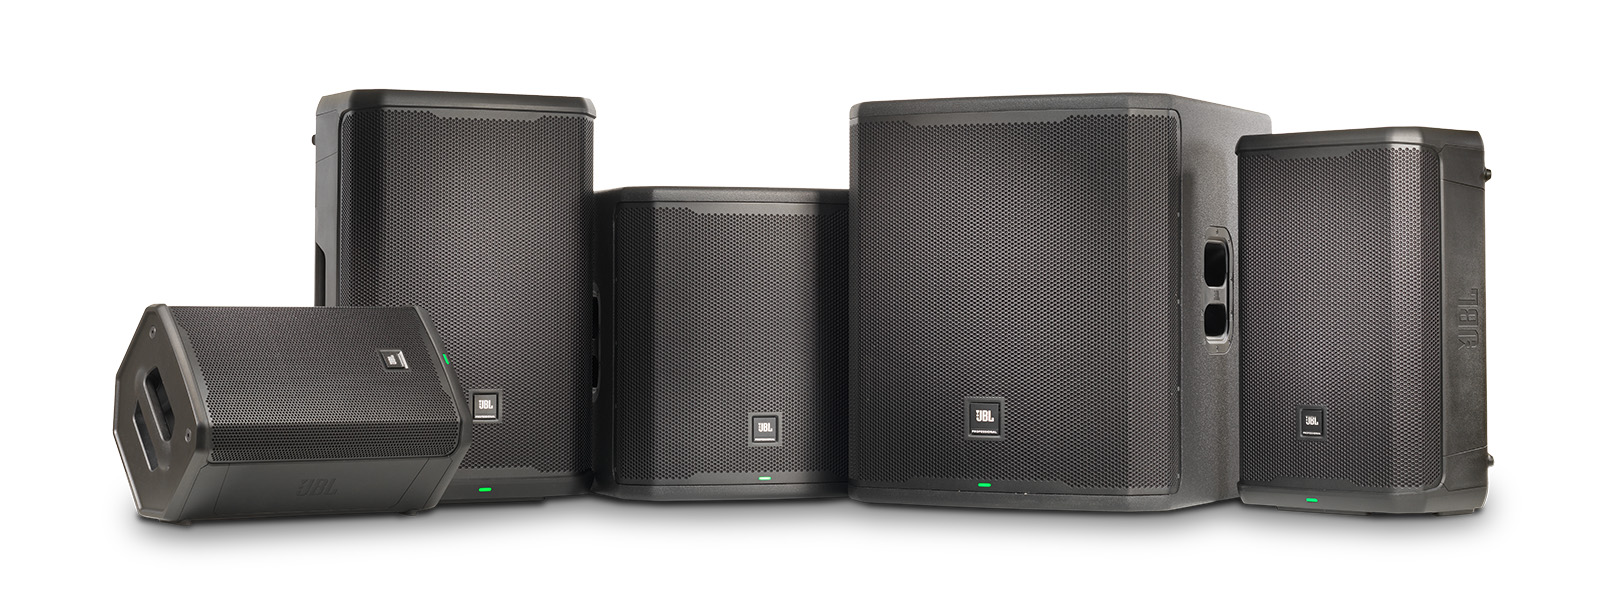 This is the modern PA system to have for mobile DJs and Bands JBL LAUNCHES PRX 900 SERIES